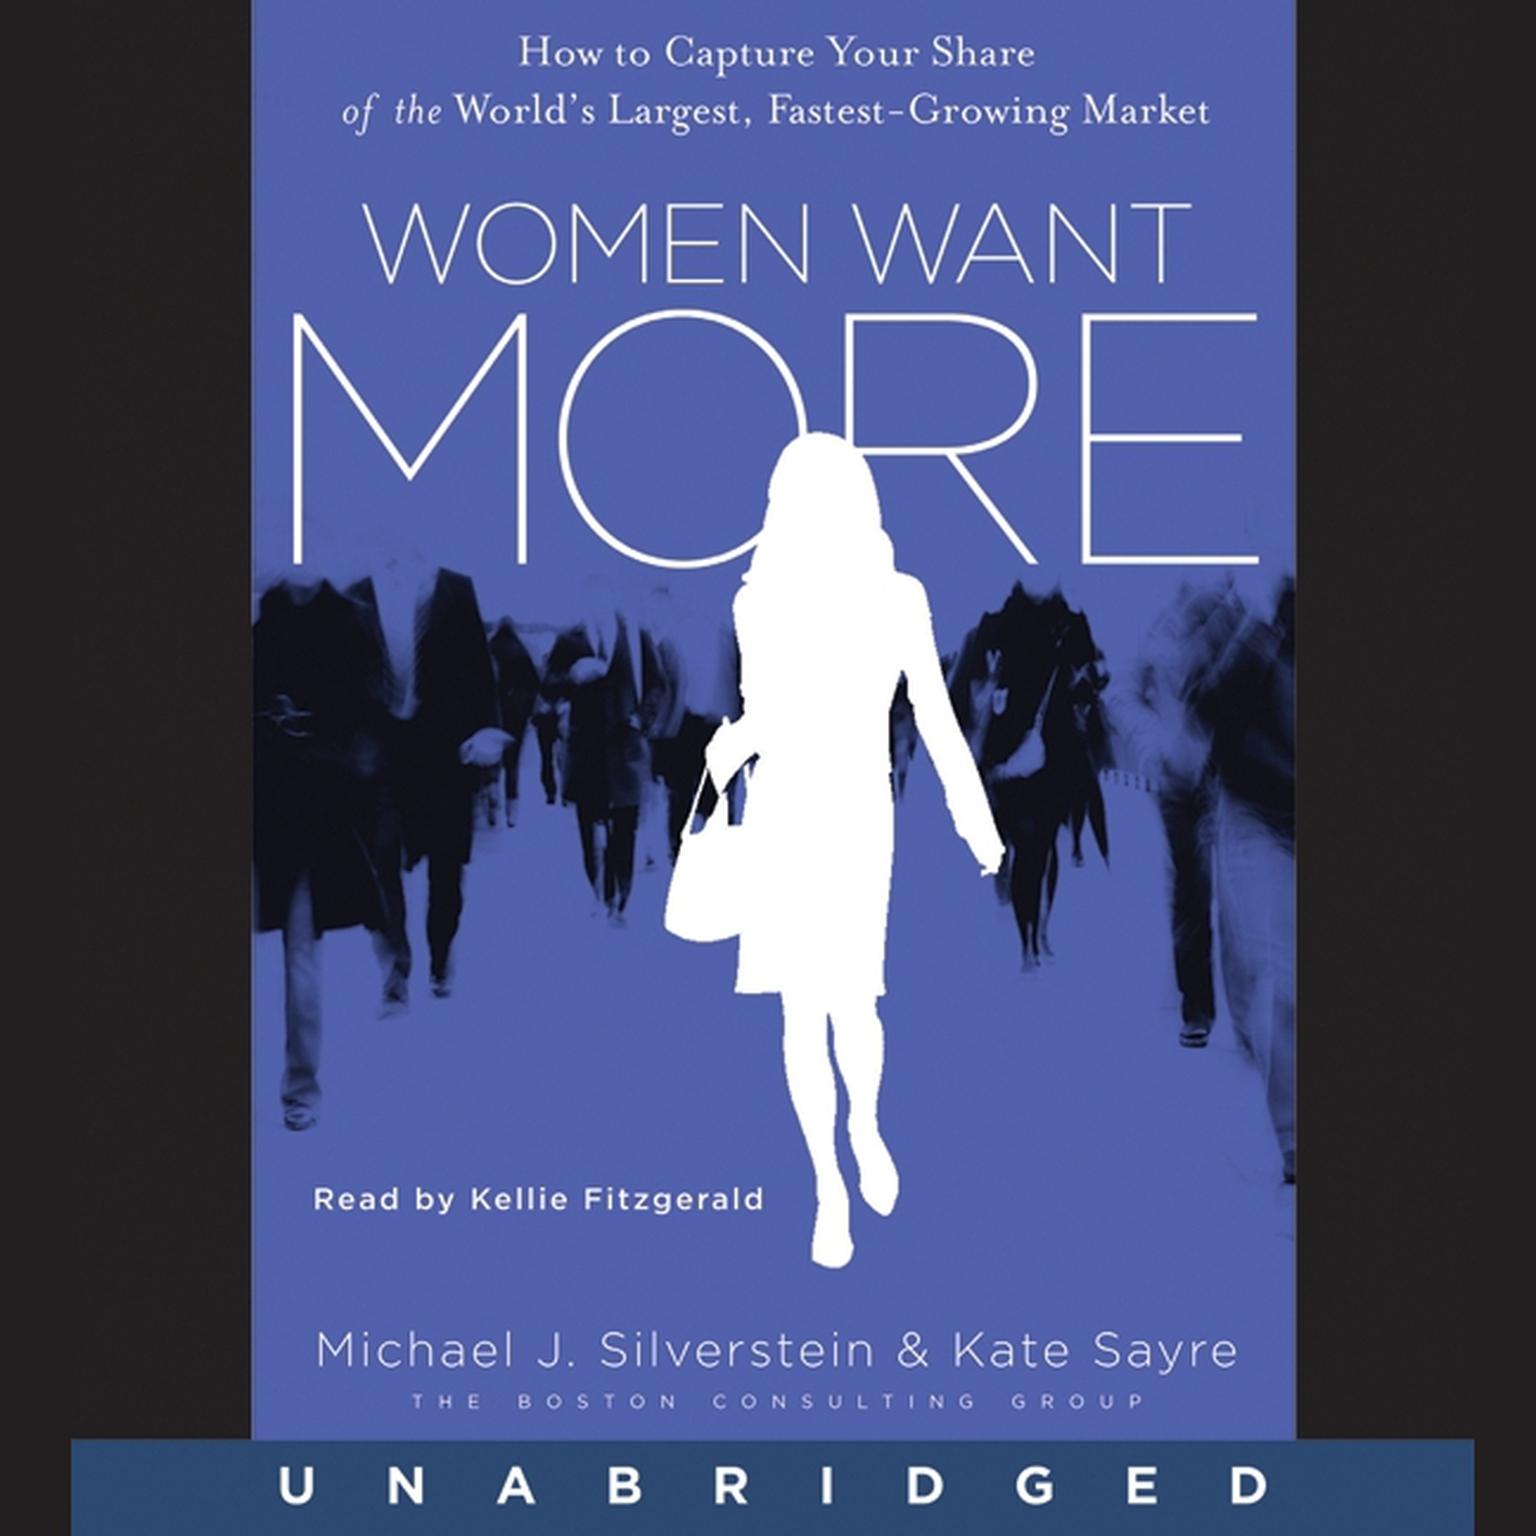 Women Want More: How to Capture Your Share of the World’s Largest, Fastest-Growing Market Audiobook, by Michael J. Silverstein